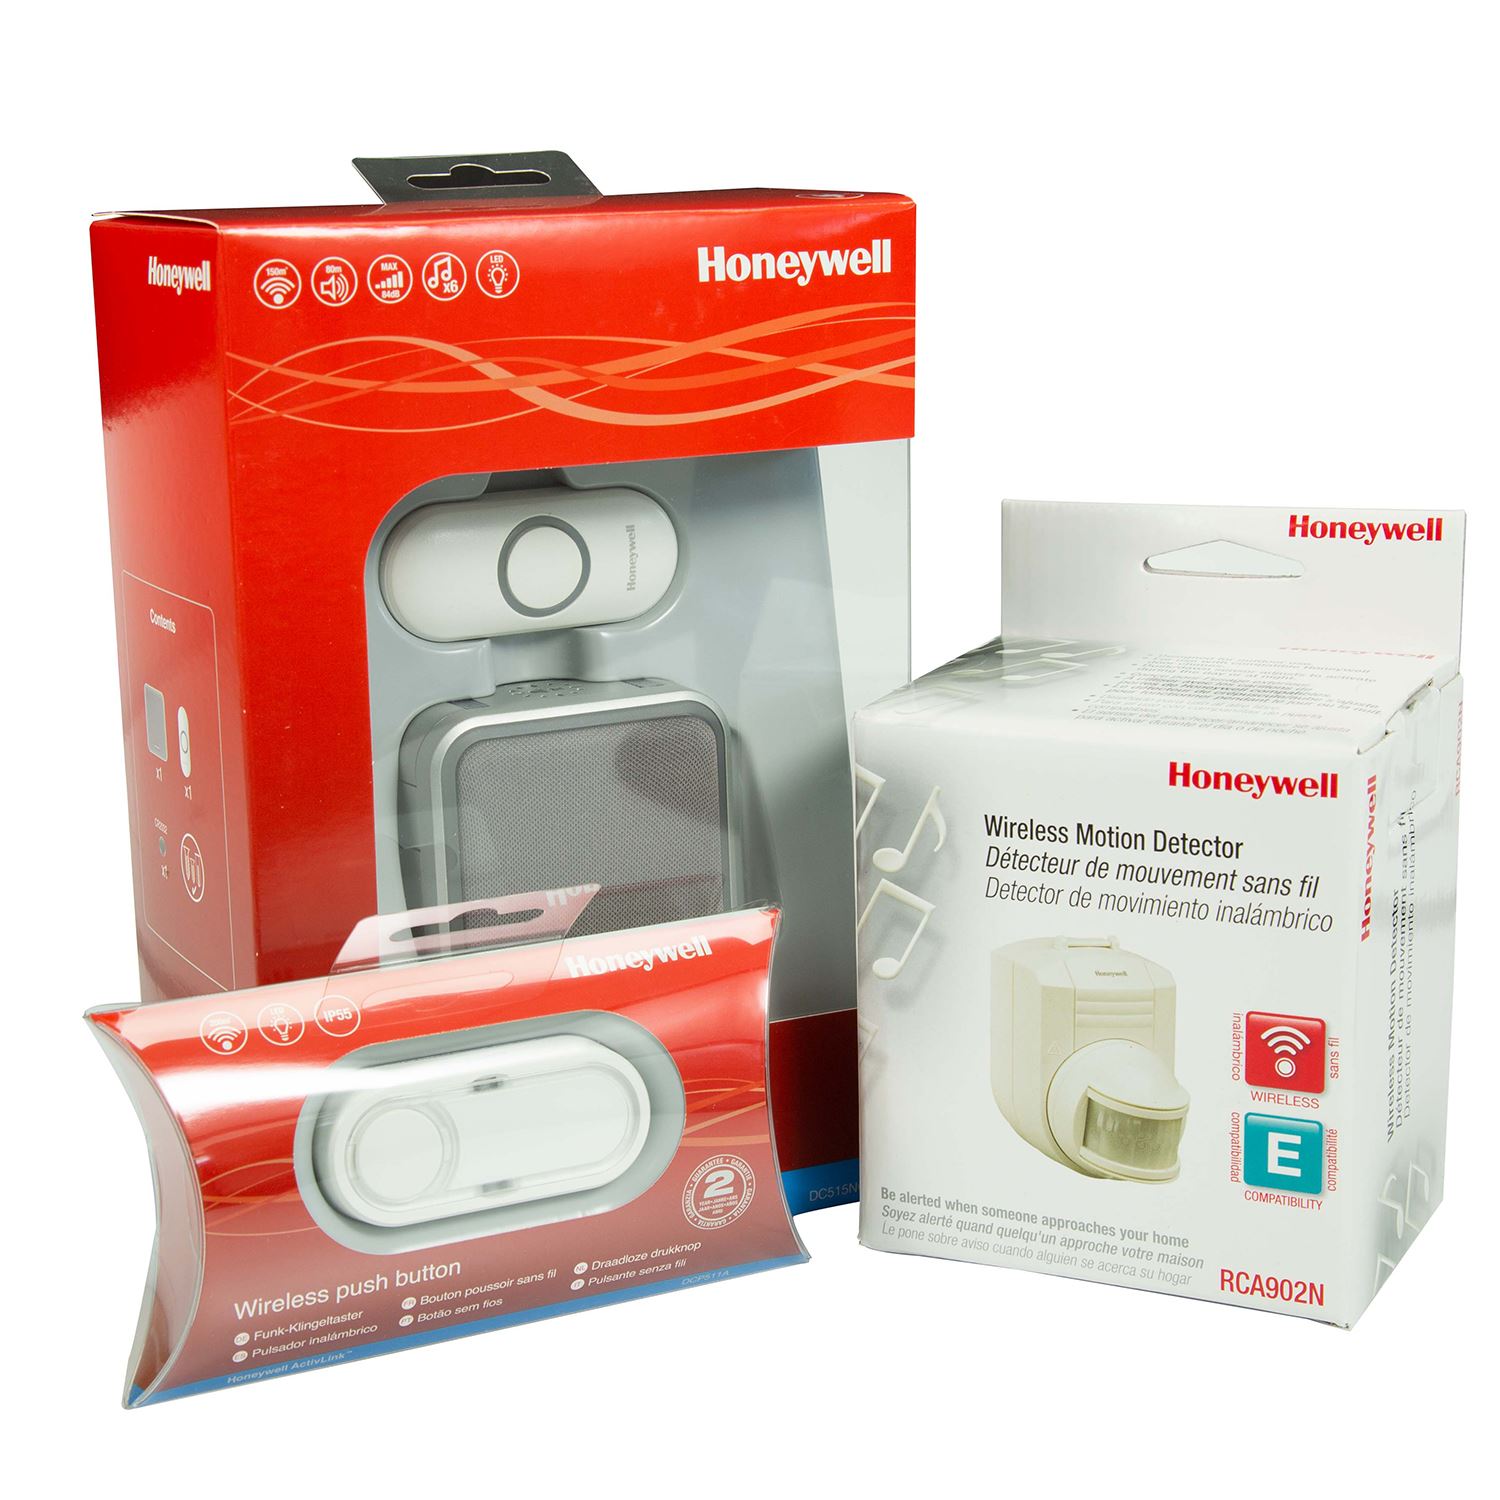 HONEYWELL_Wireless_Series_5_Plug-in_Doorbell_with_Nightlight._Includes_2x_Wireless_Push_Buttons_(HONDCP511GA)_&_1x_Motion_Detector_(HONRCA902A)._6x_Selectable_Colours